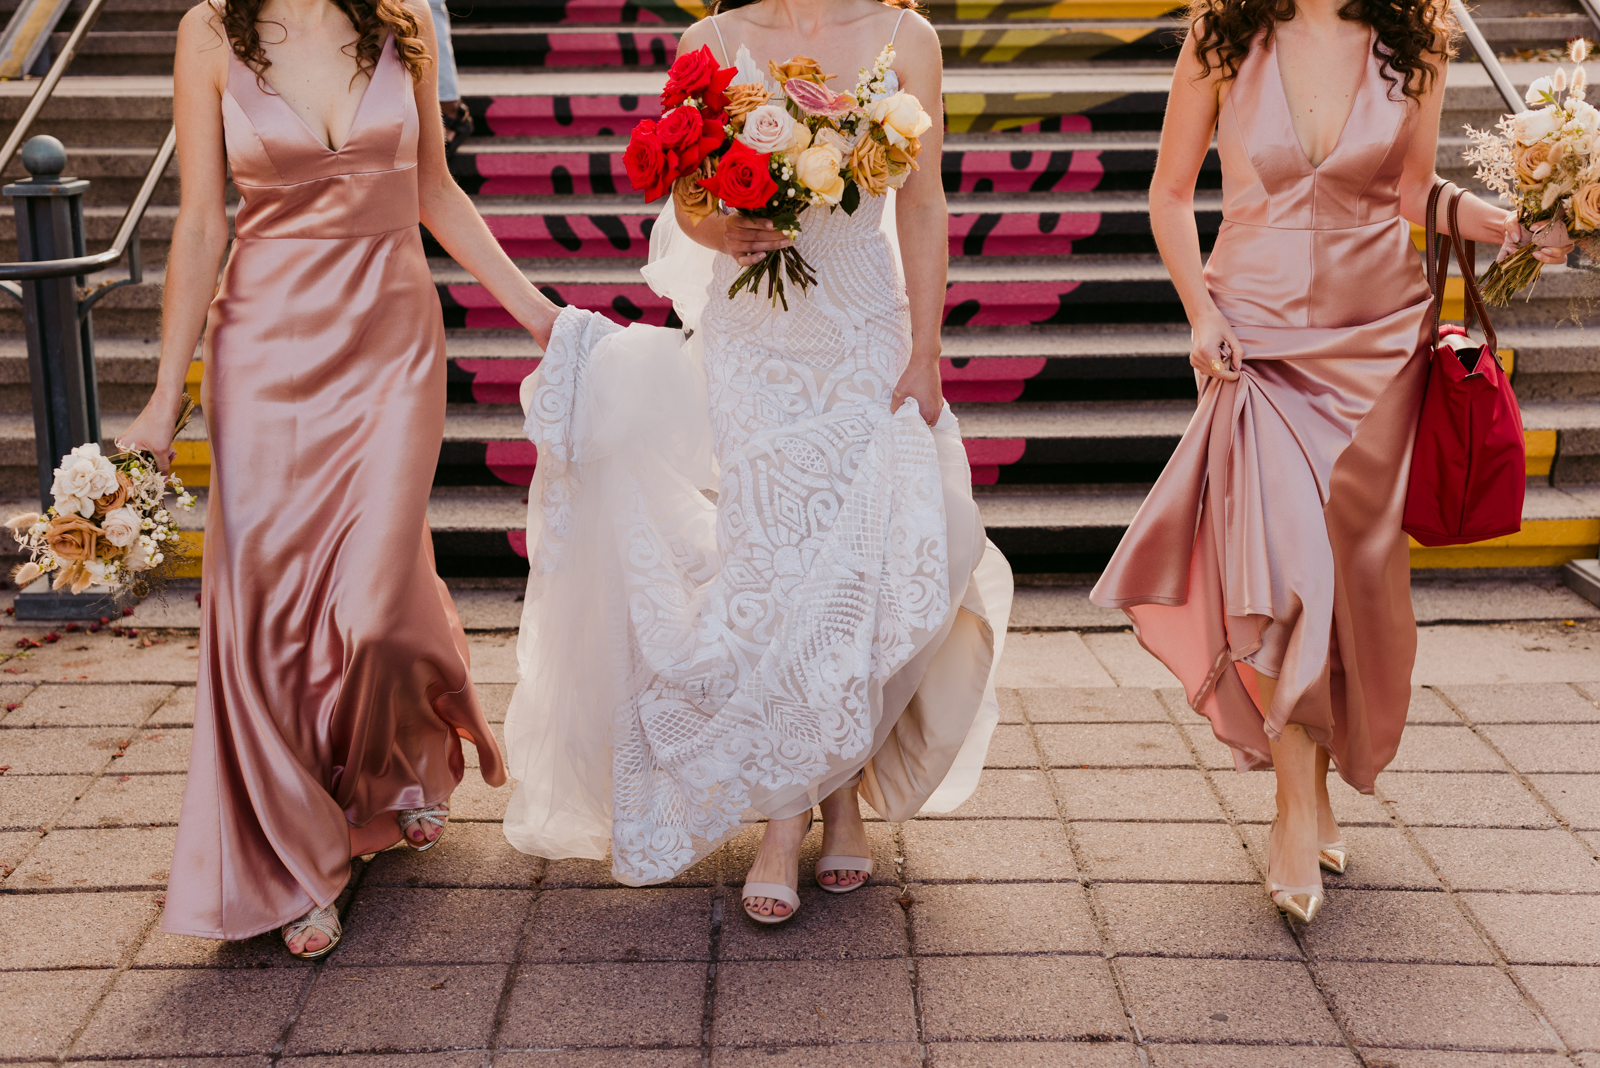 bride and bridesmaids walking down painted staircase in byward market at sunset